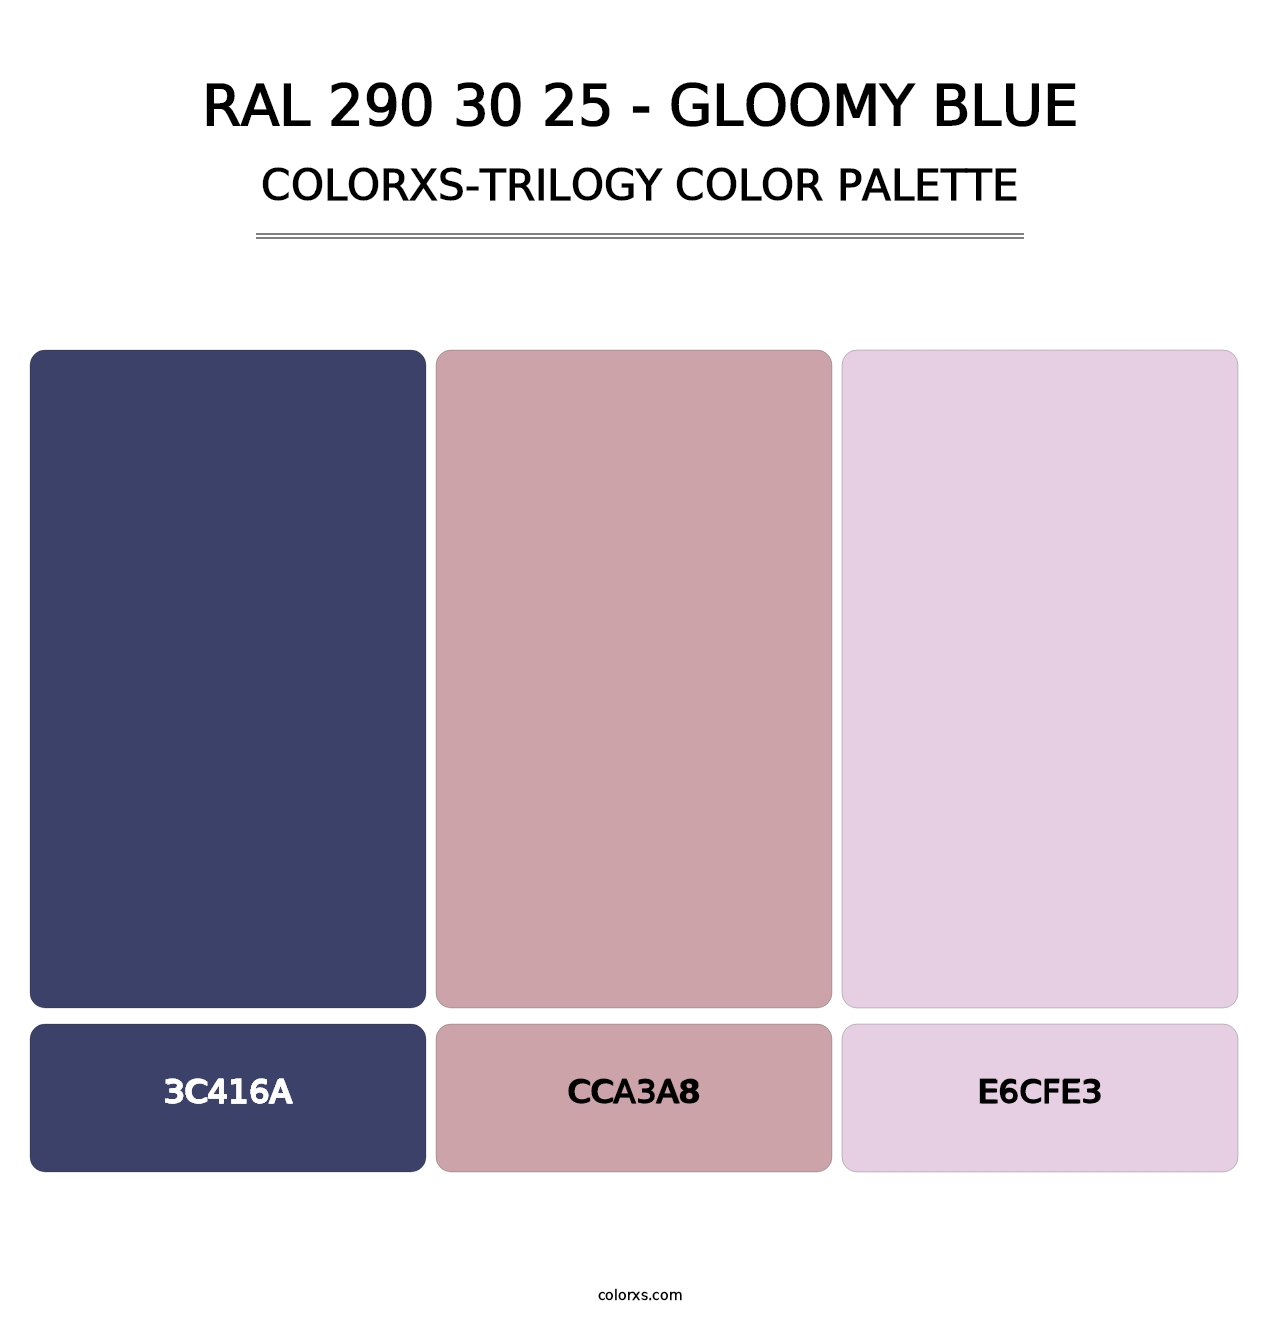 RAL 290 30 25 - Gloomy Blue - Colorxs Trilogy Palette